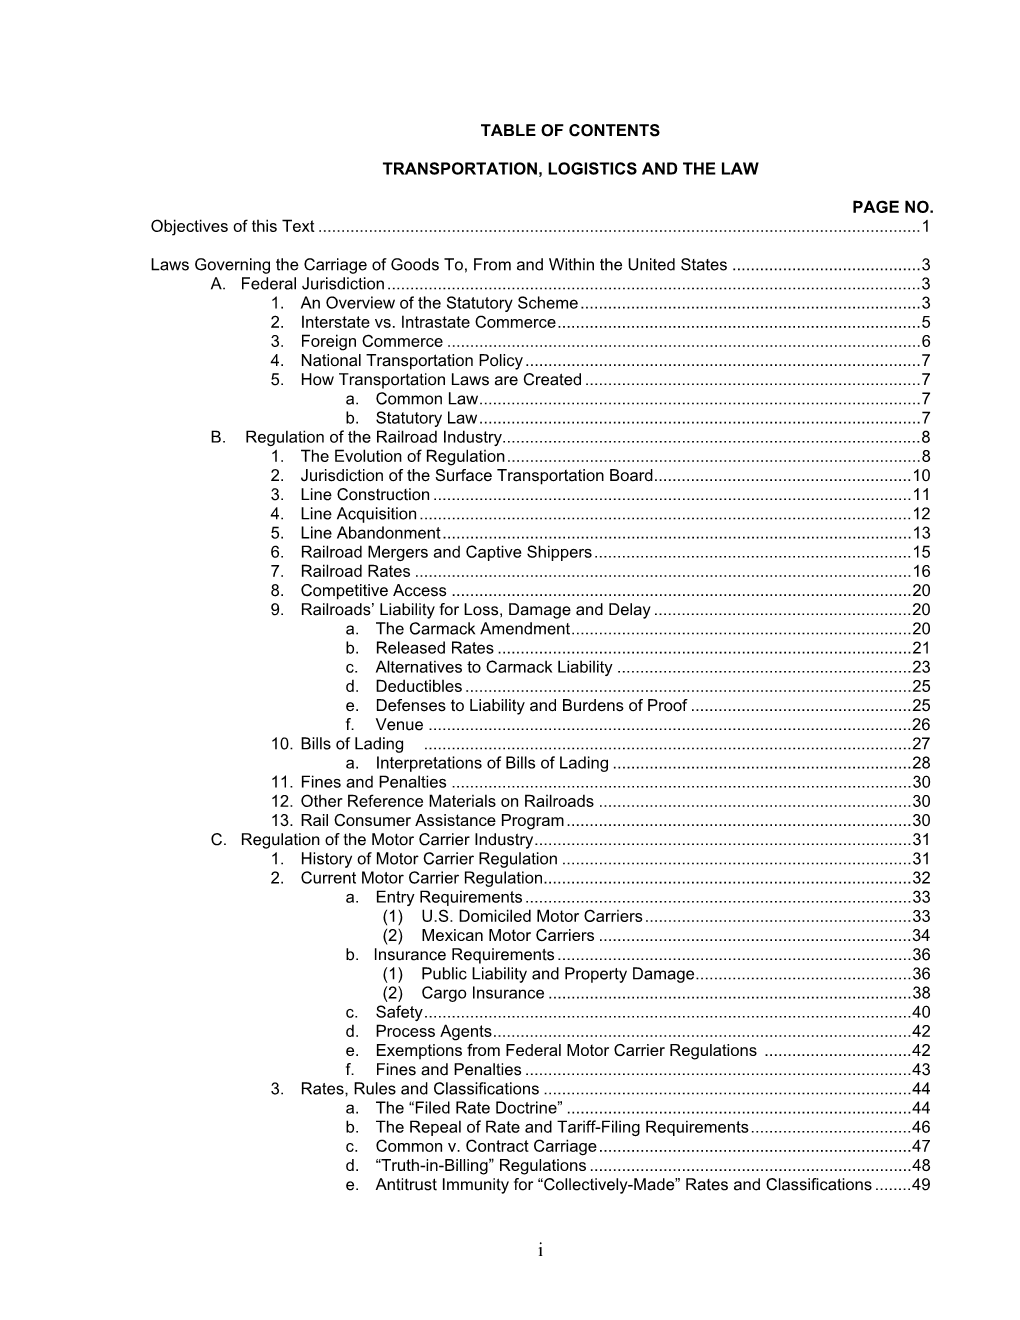 Table of Contents 2Nd Edition Transportation, Logistics and The